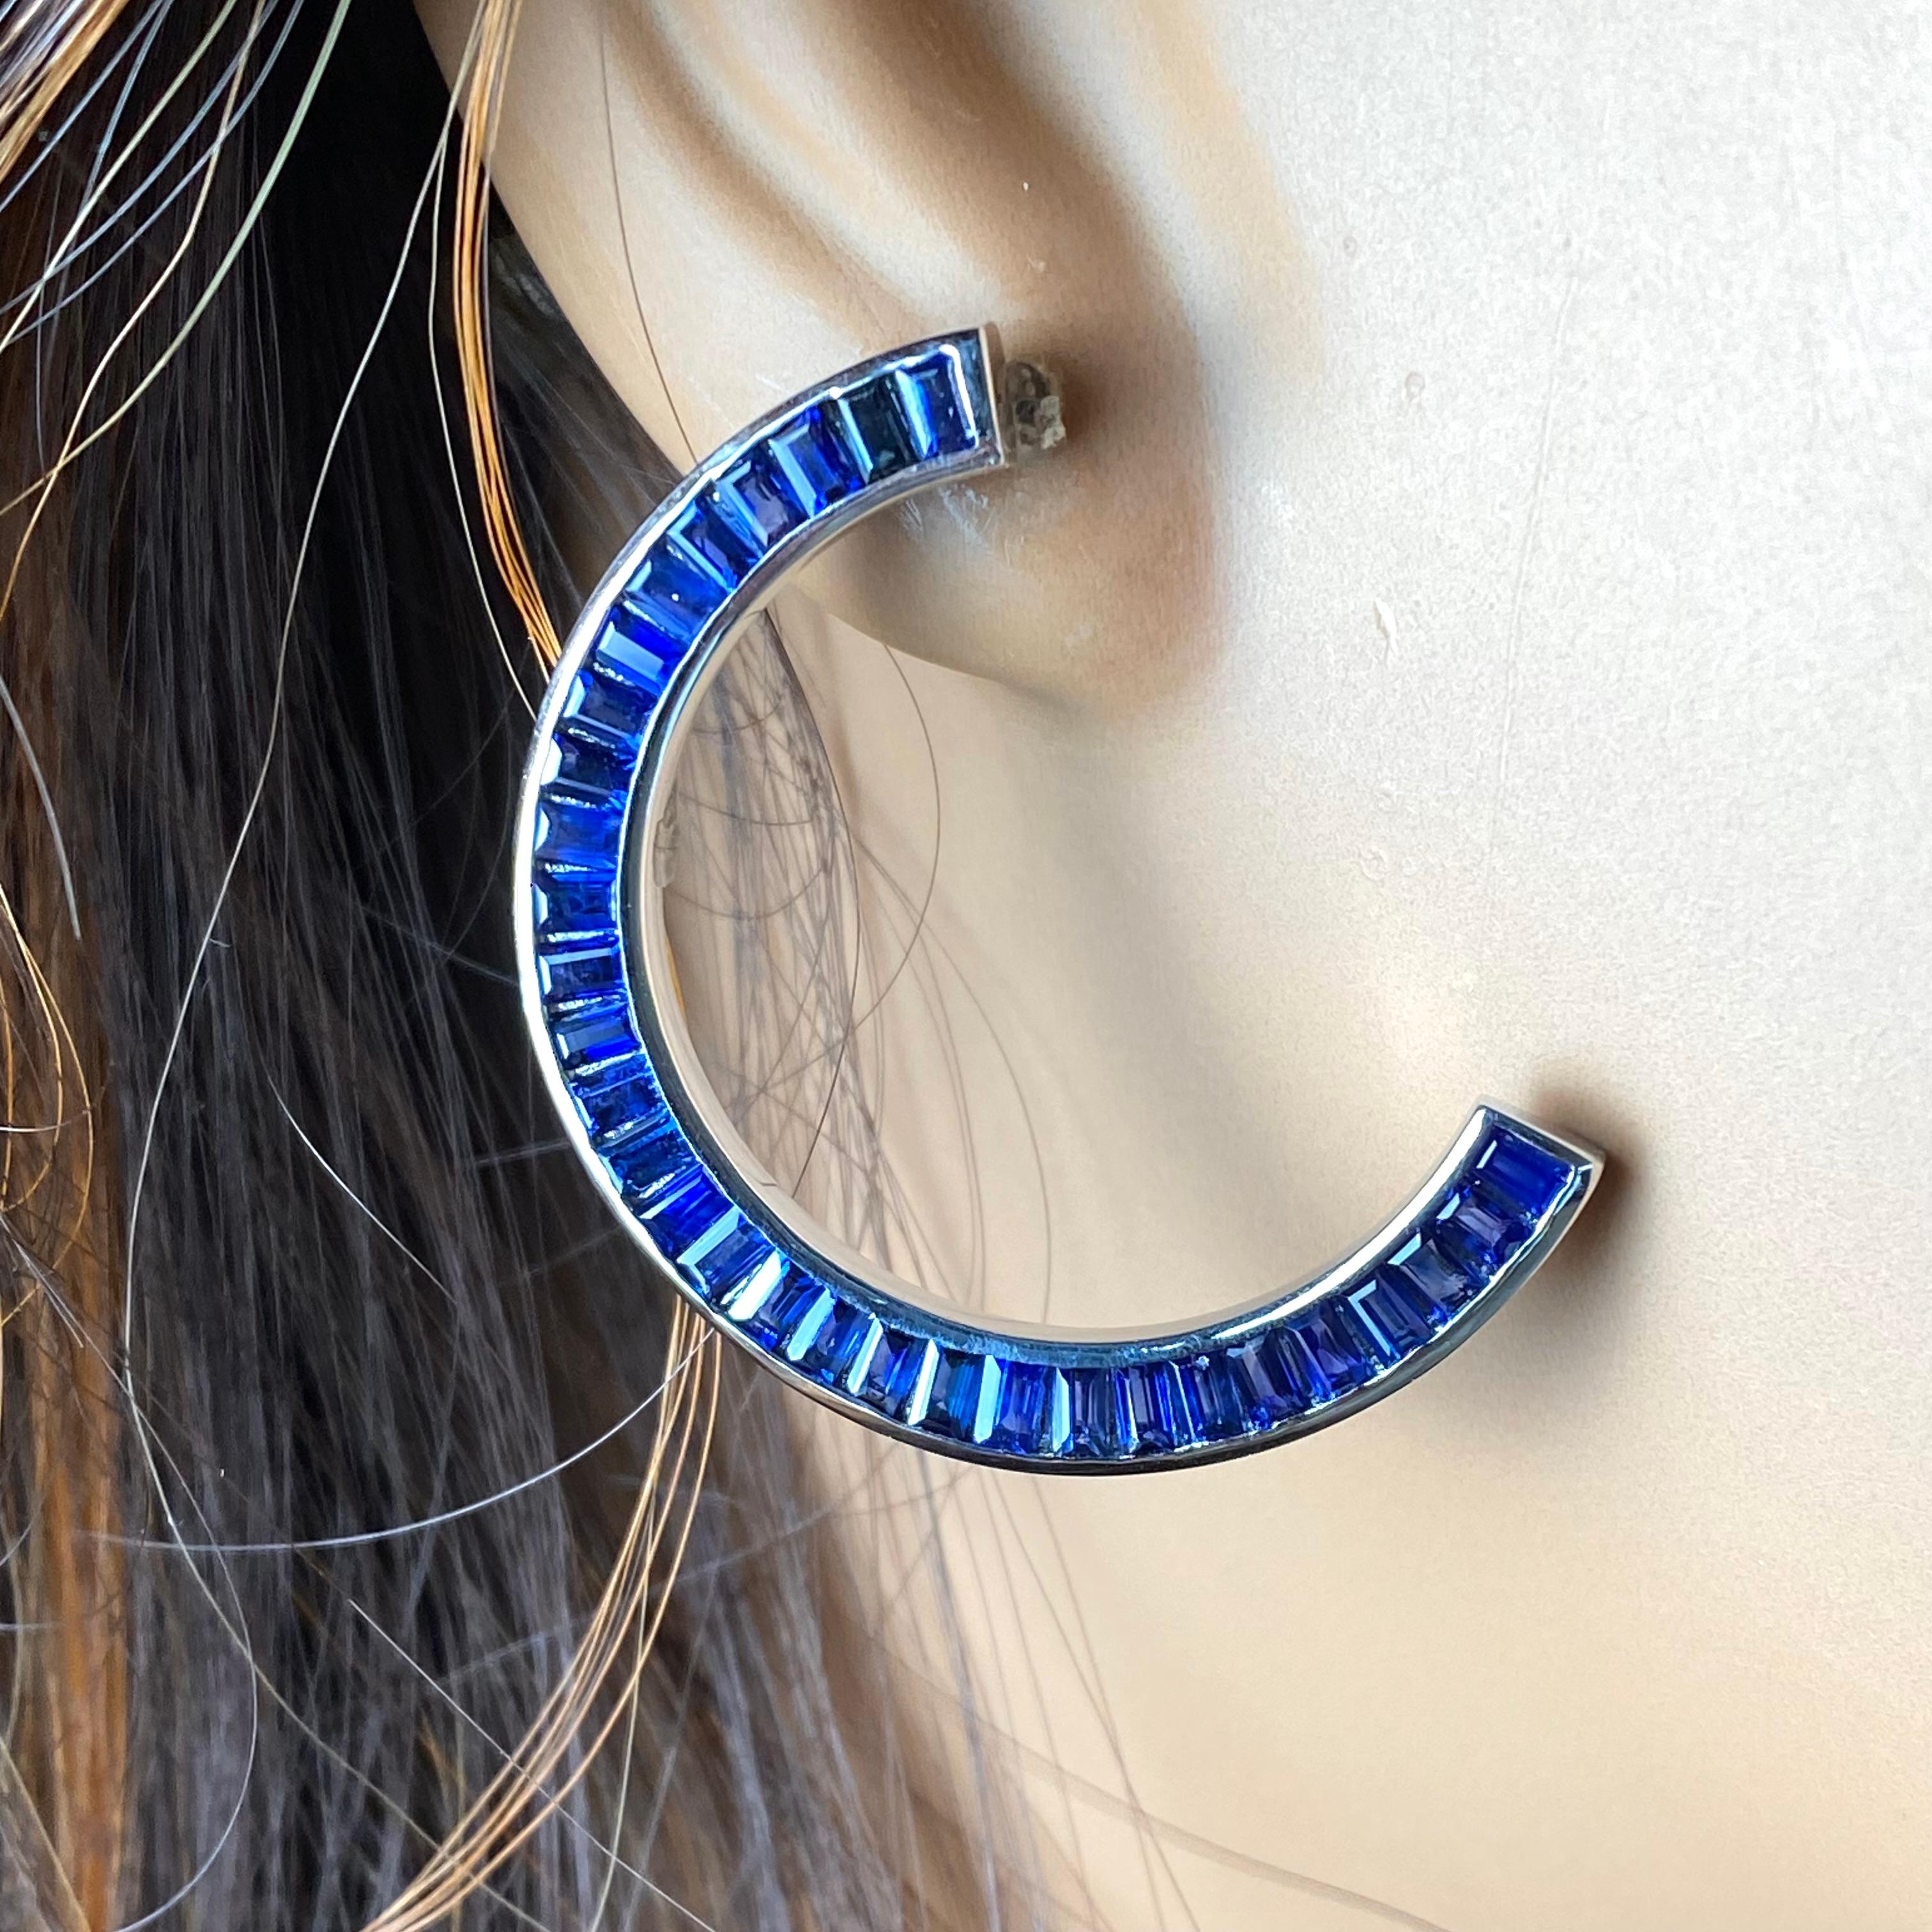 Introducing our exquisite 14 karat white gold front-facing half moon earrings, adorned with a mesmerizing array of 62 perfectly matched baguette sapphires, totaling a stunning 8.30 carats. Crafted to epitomize elegance and sophistication, these